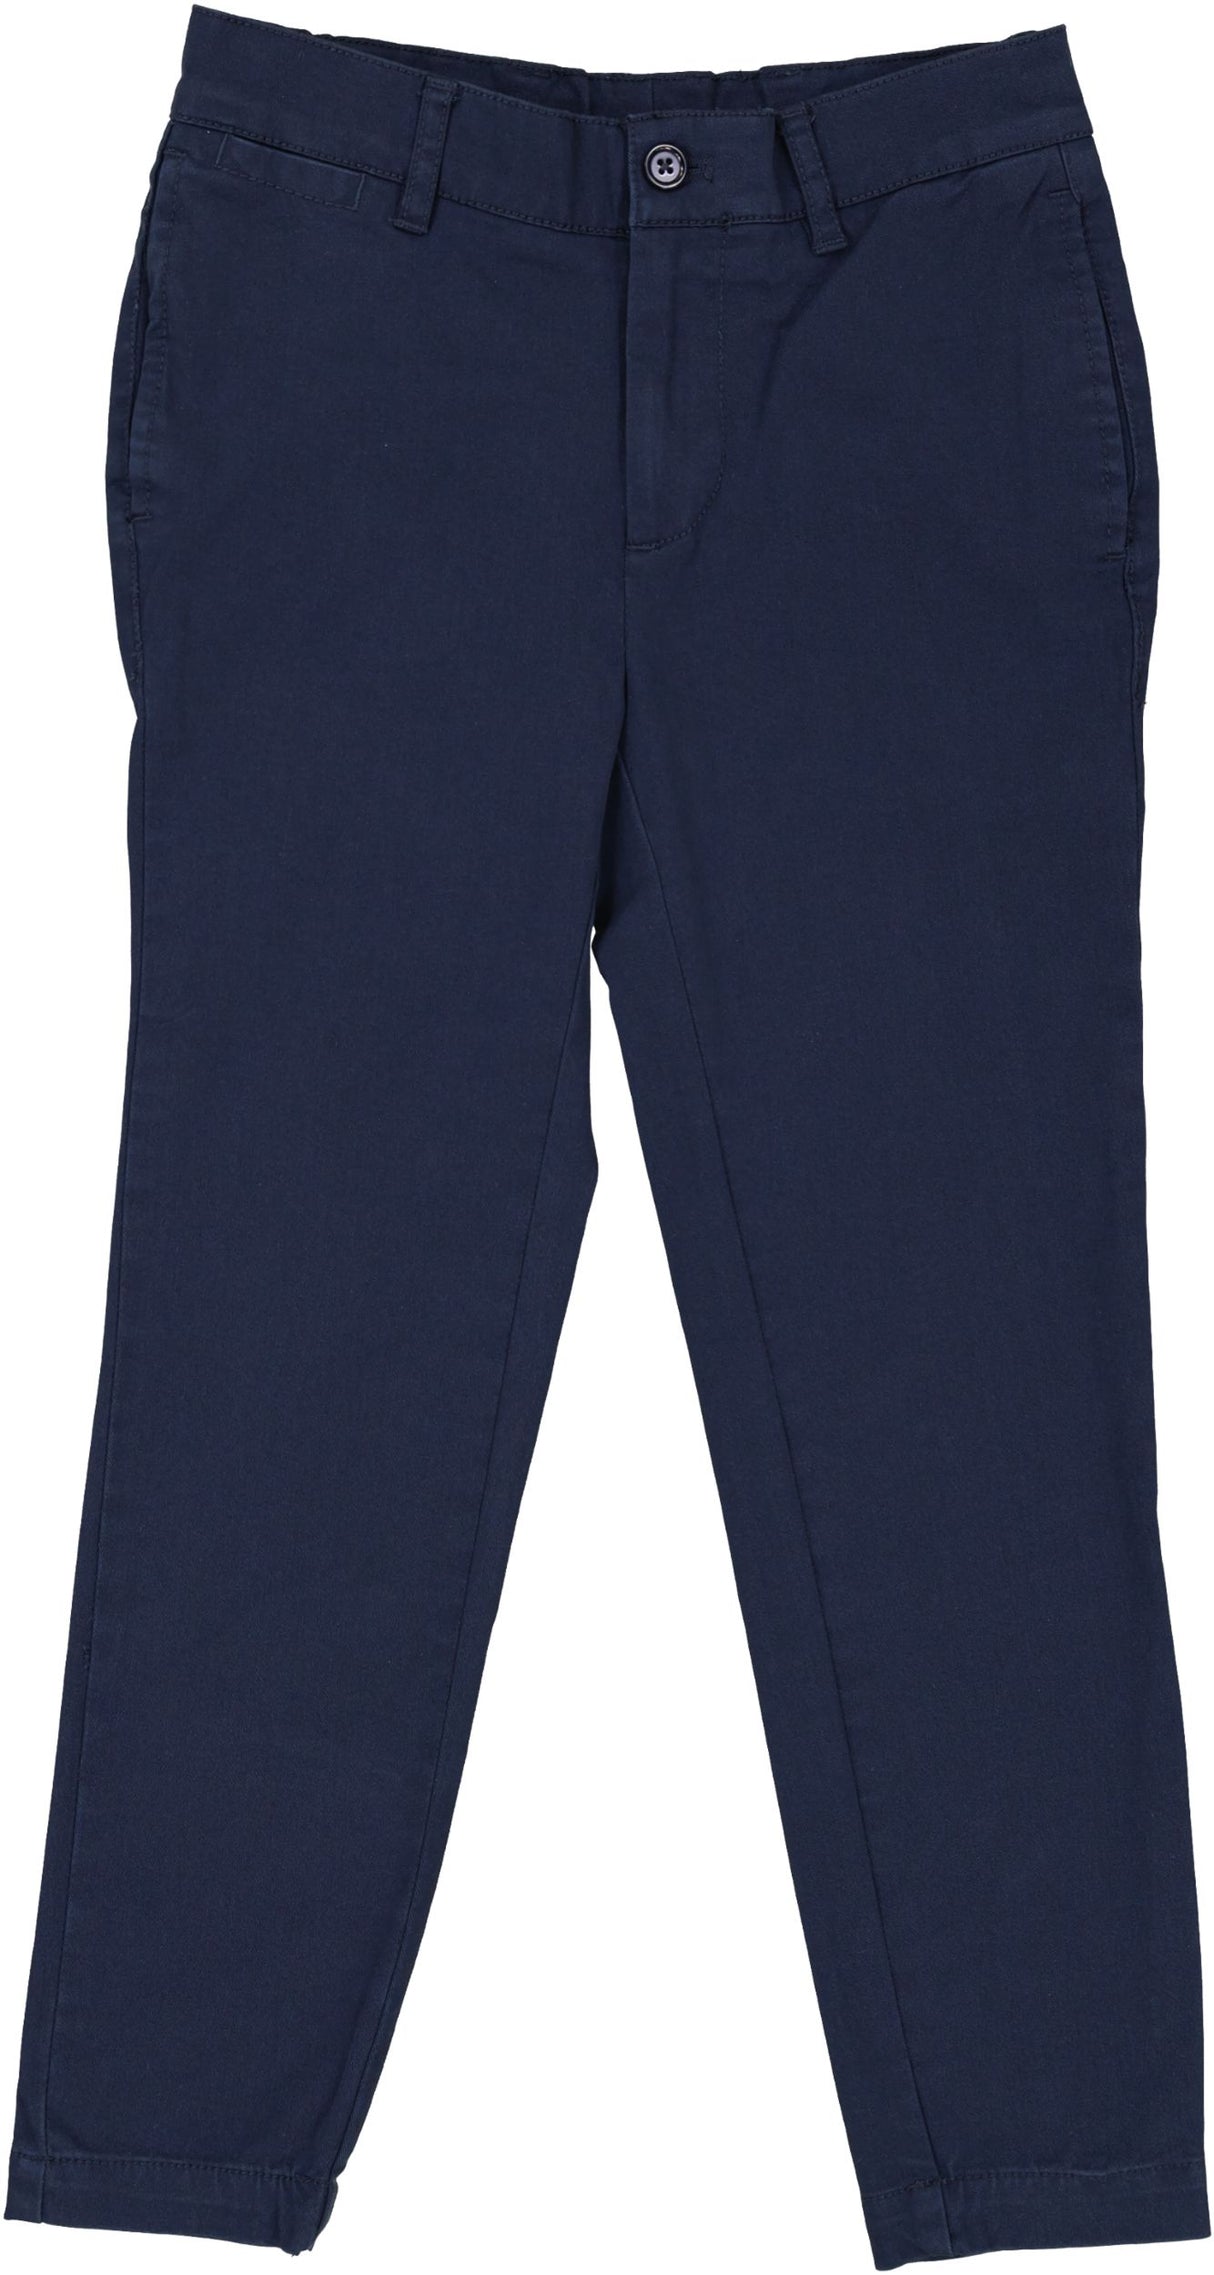 T.O. Collection Boys Navy FLEX Stretch Suit Separates